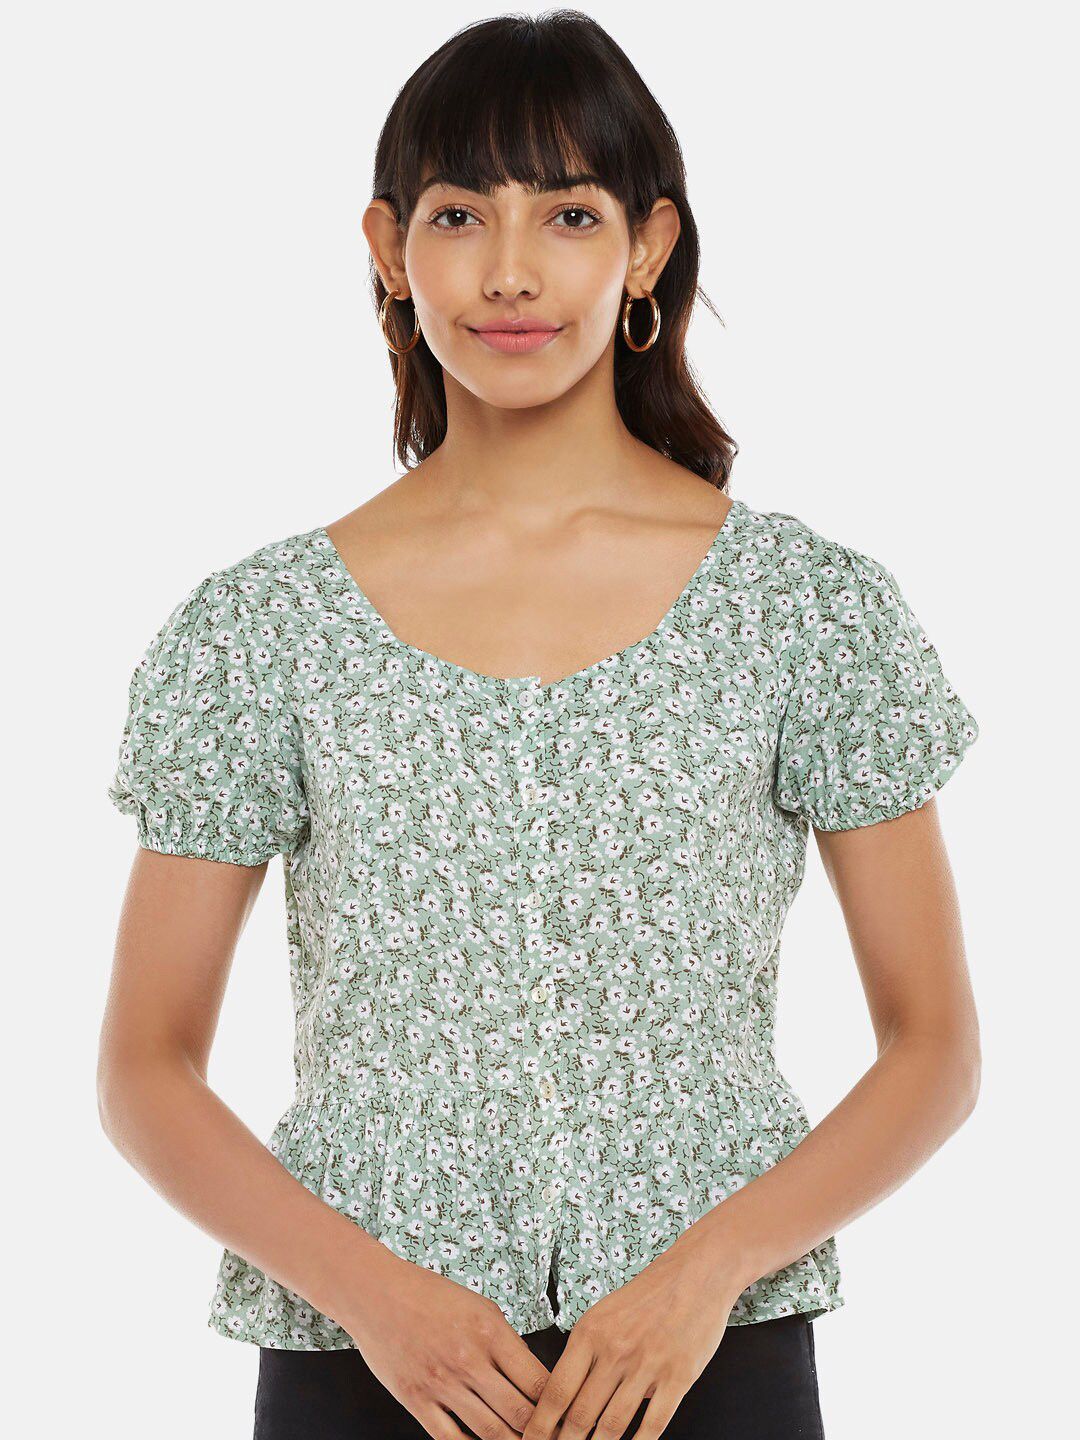 Honey by Pantaloons Women Green & White Floral Print Top Price in India